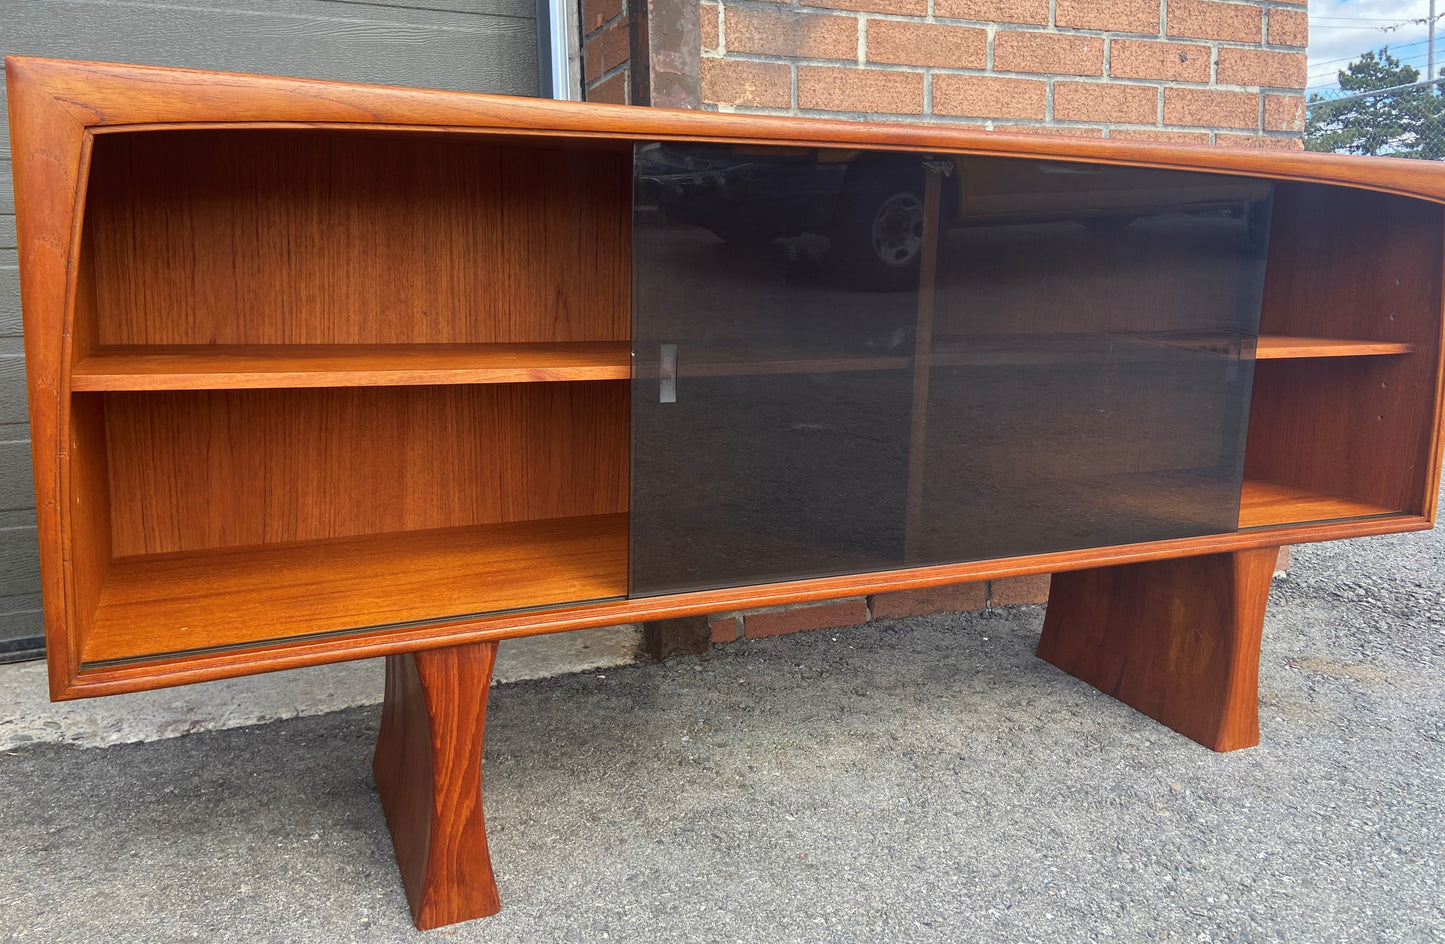 REFINISHED Mid Century Modern Teak Media TV Console 5 ft Perfect